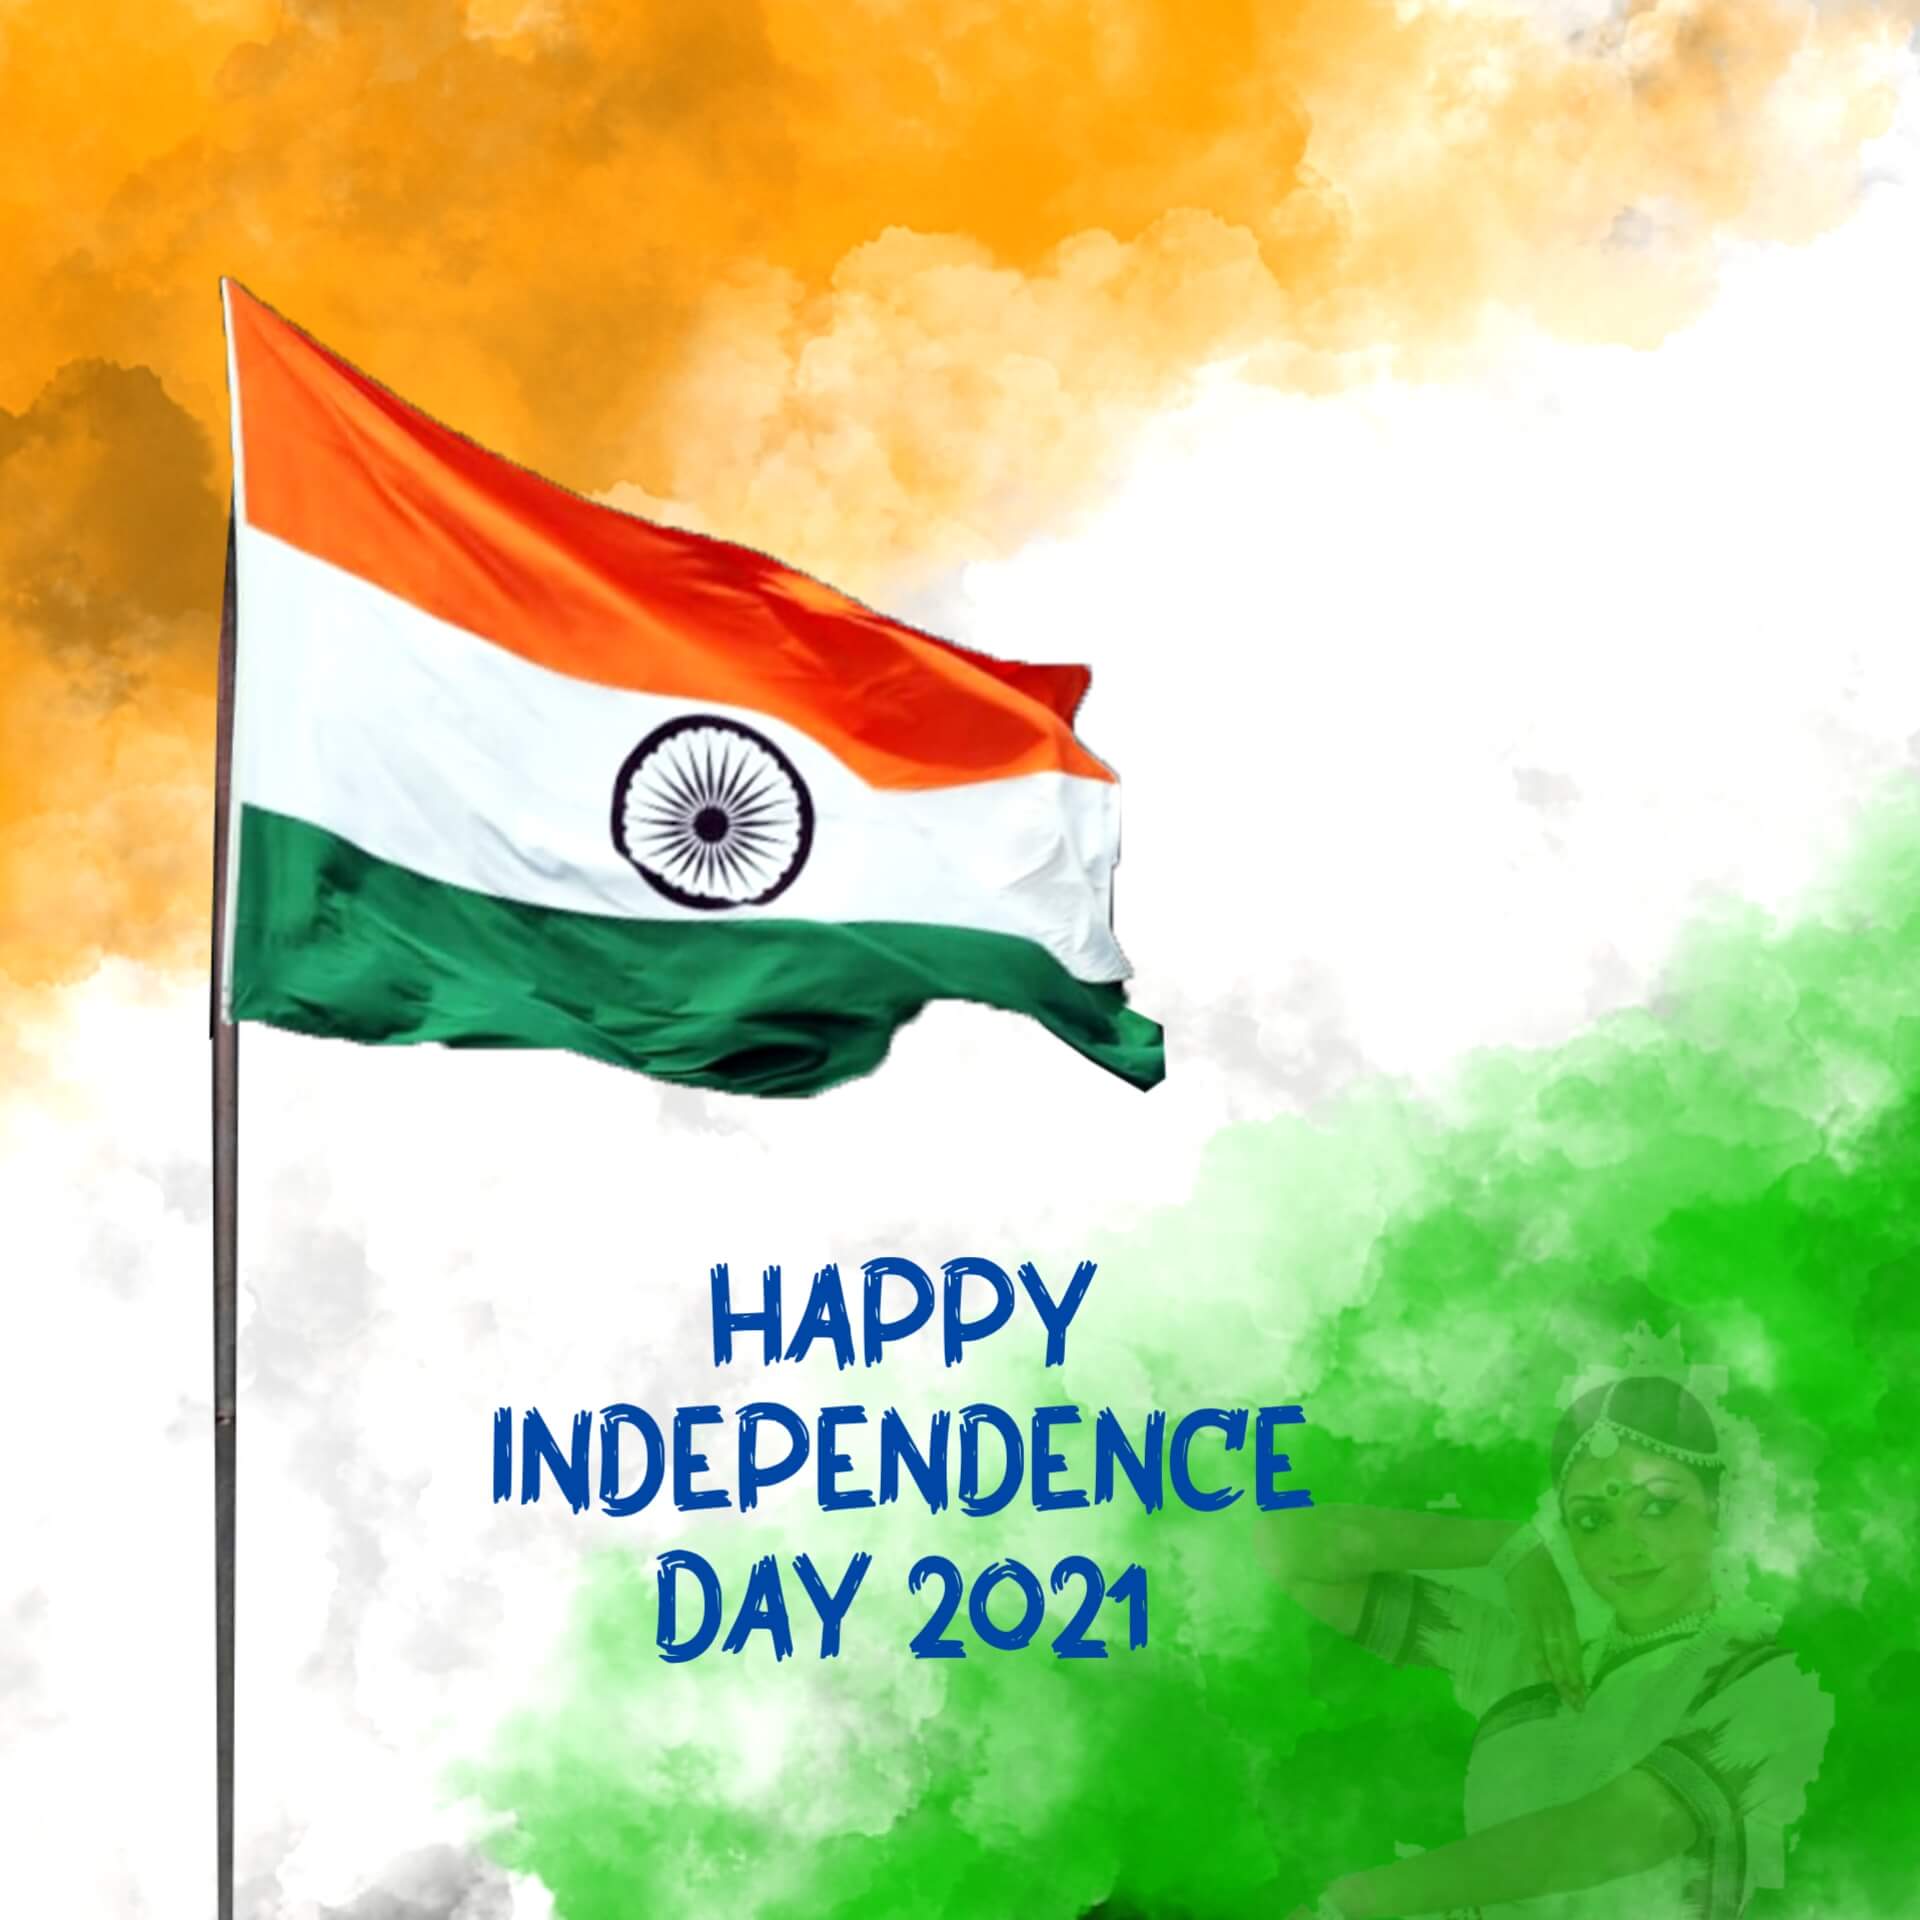 60 BEST India Independence Day Images Photos Pictures 2021